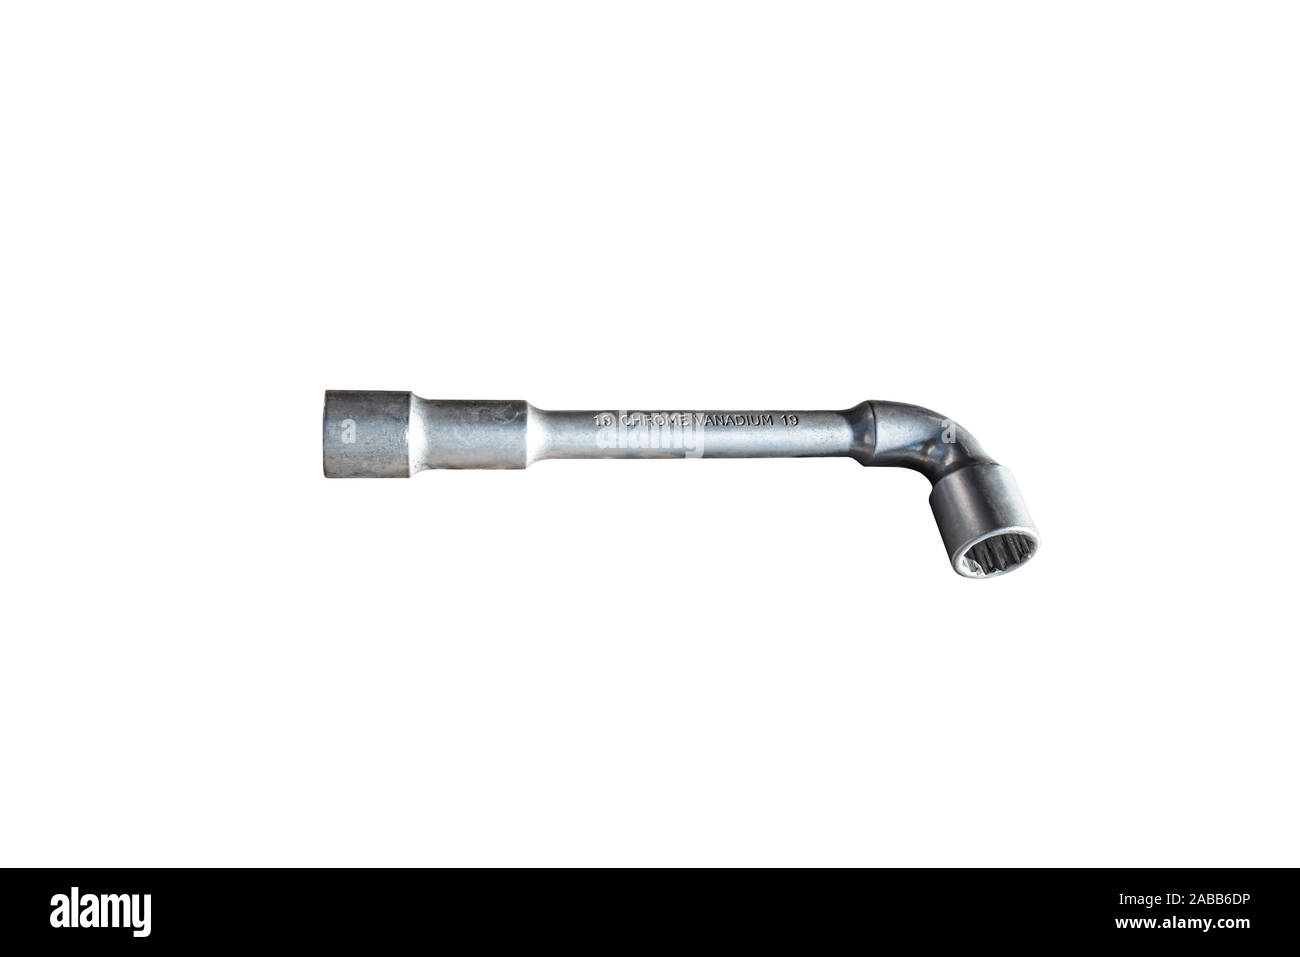 Double 19 size ring wrench made of chrome vanadium steel, isolated on a white background with a clipping path. Stock Photo